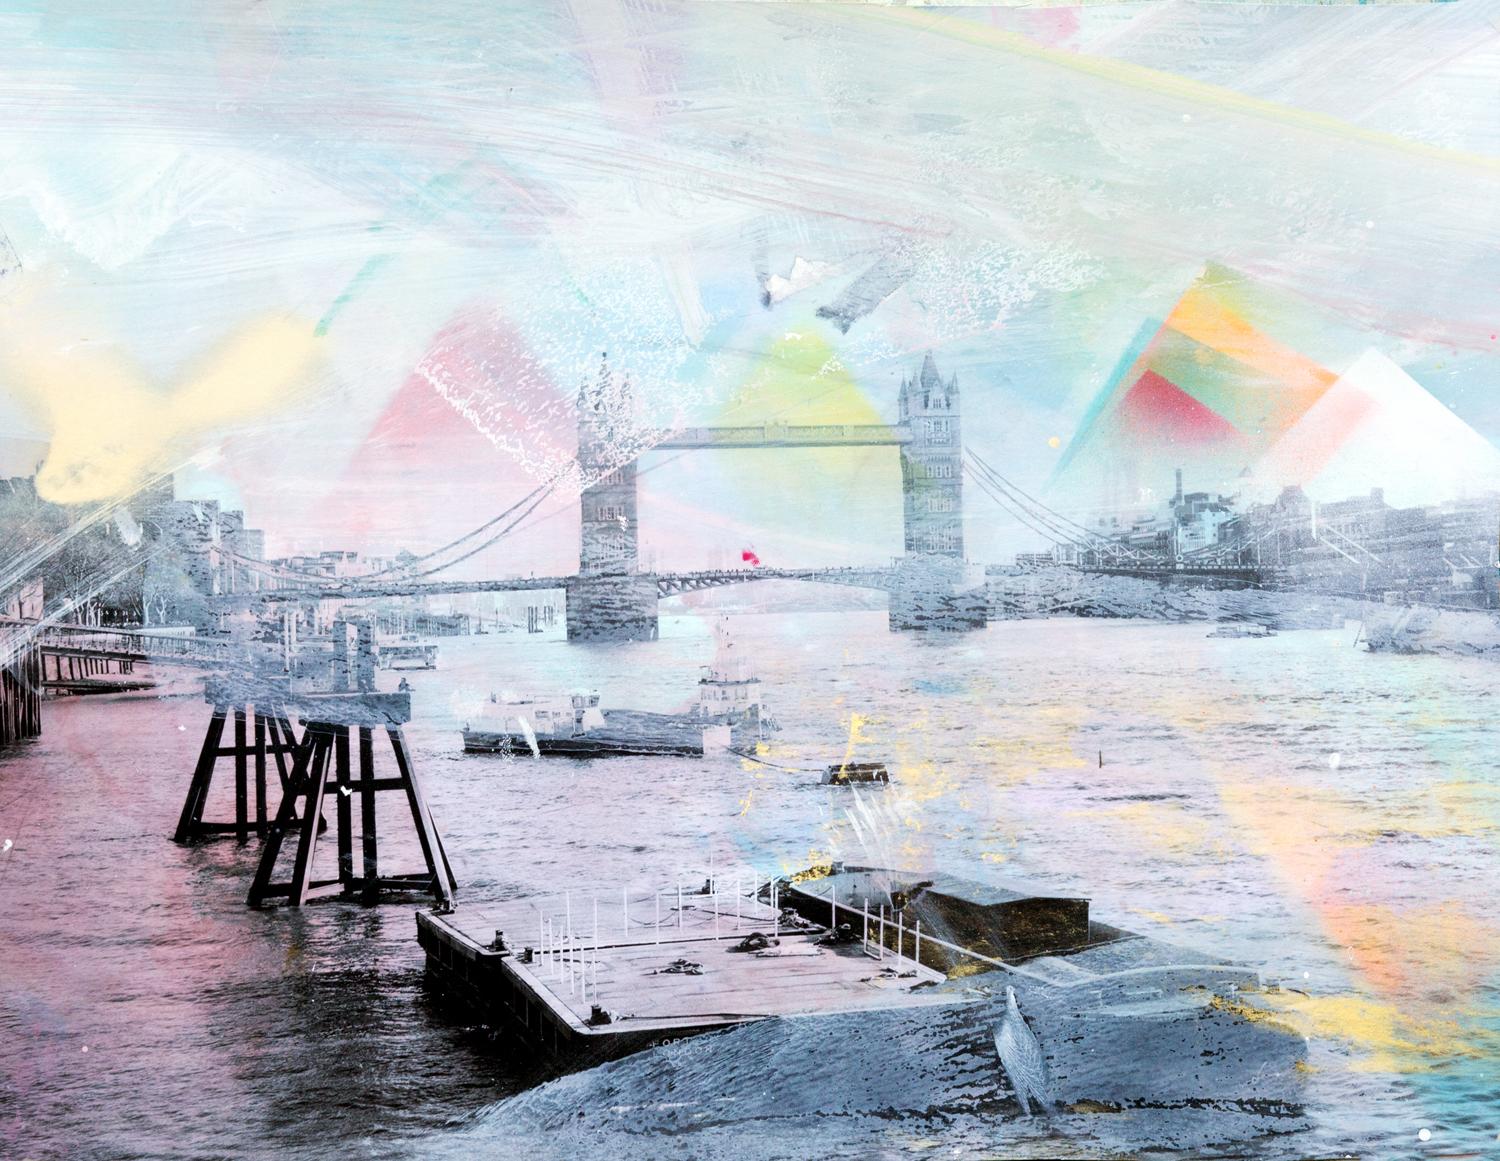 Unforgotten Series #5 - Handpainted photography, colorful abstract Tower Bridge